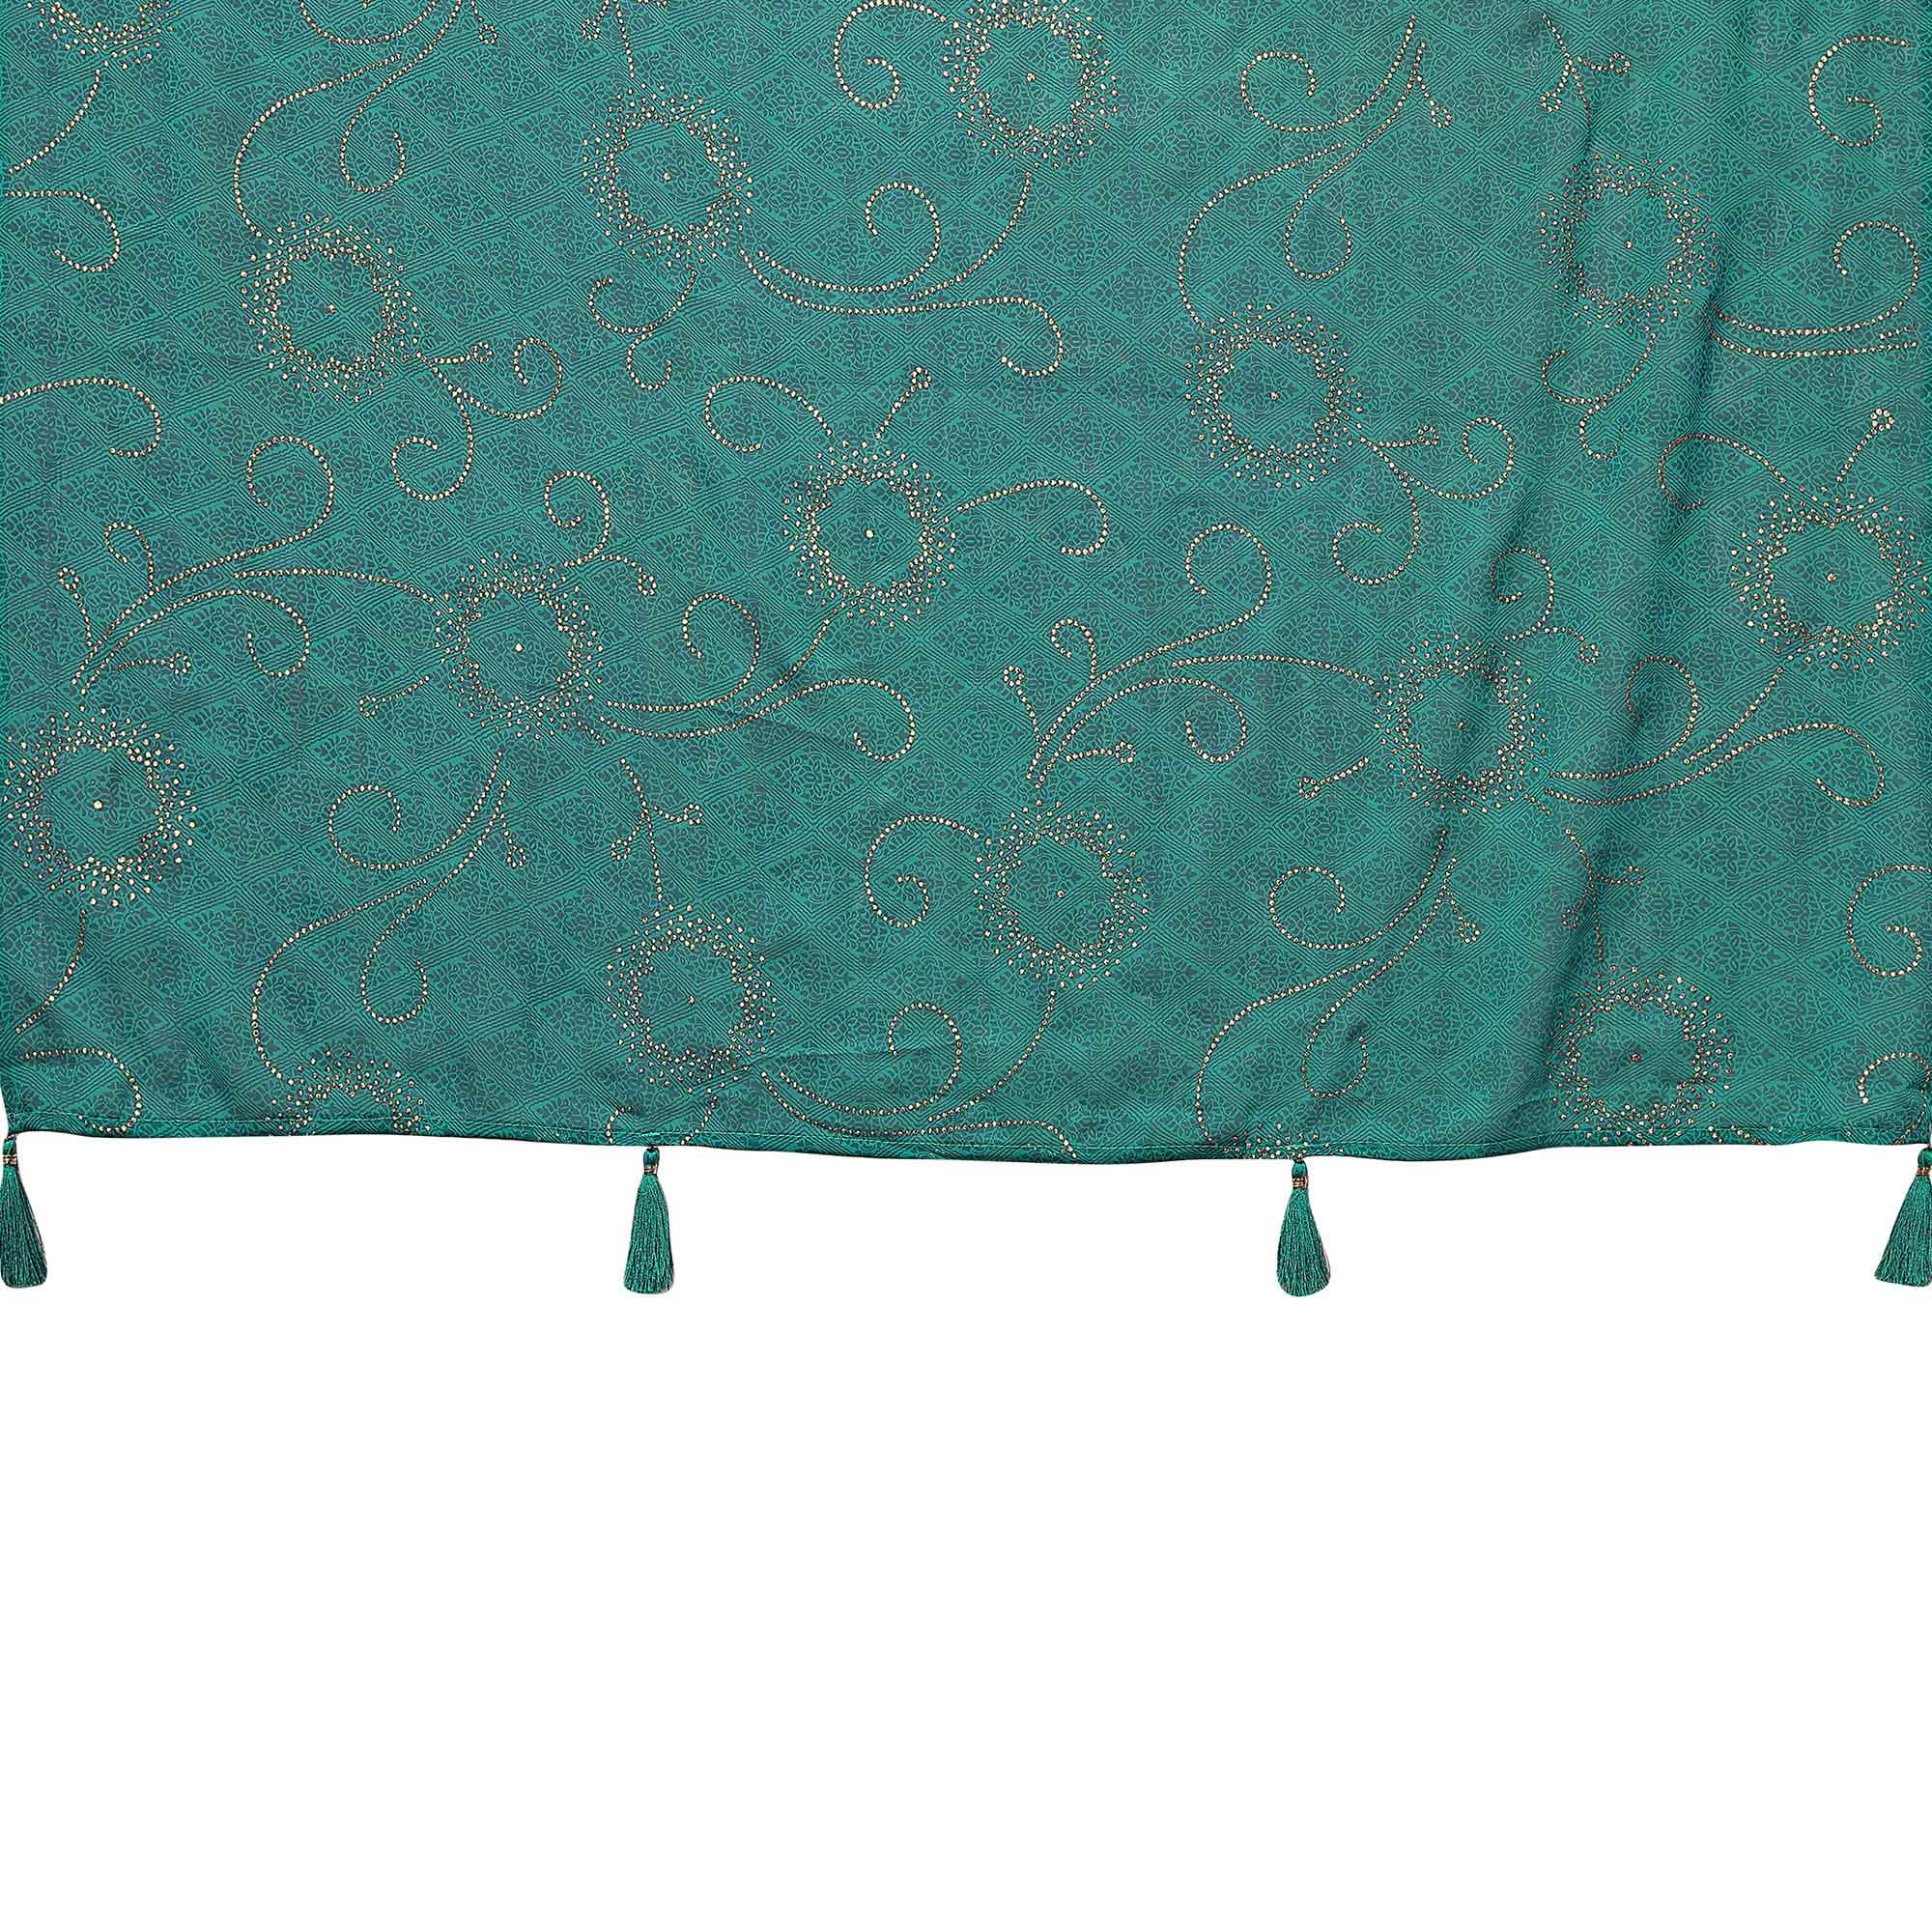 Rama Green Mukaish With Foil Printed Silk Saree With Tassels